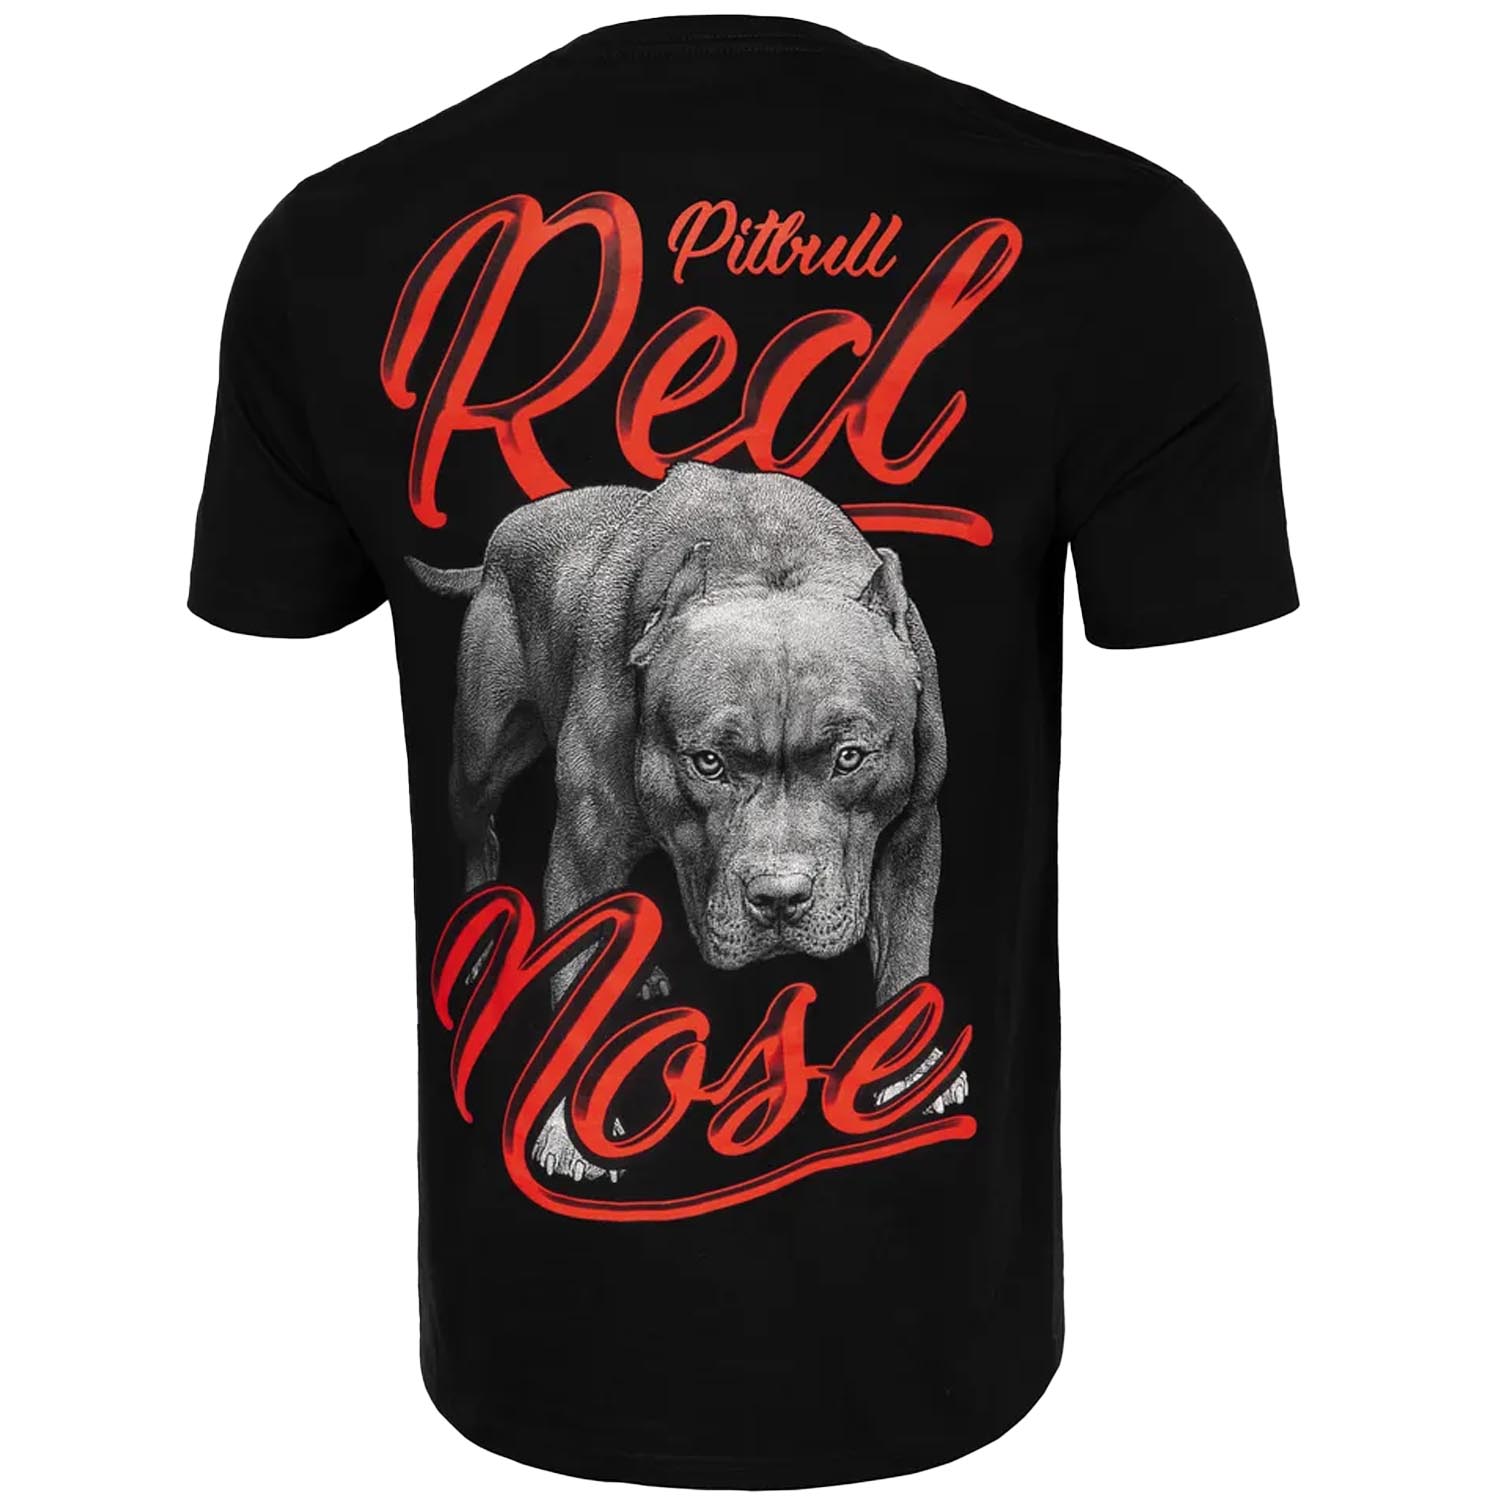 Pit Bull West Coast T-Shirt, Red Nose 23, black-red, XXXL